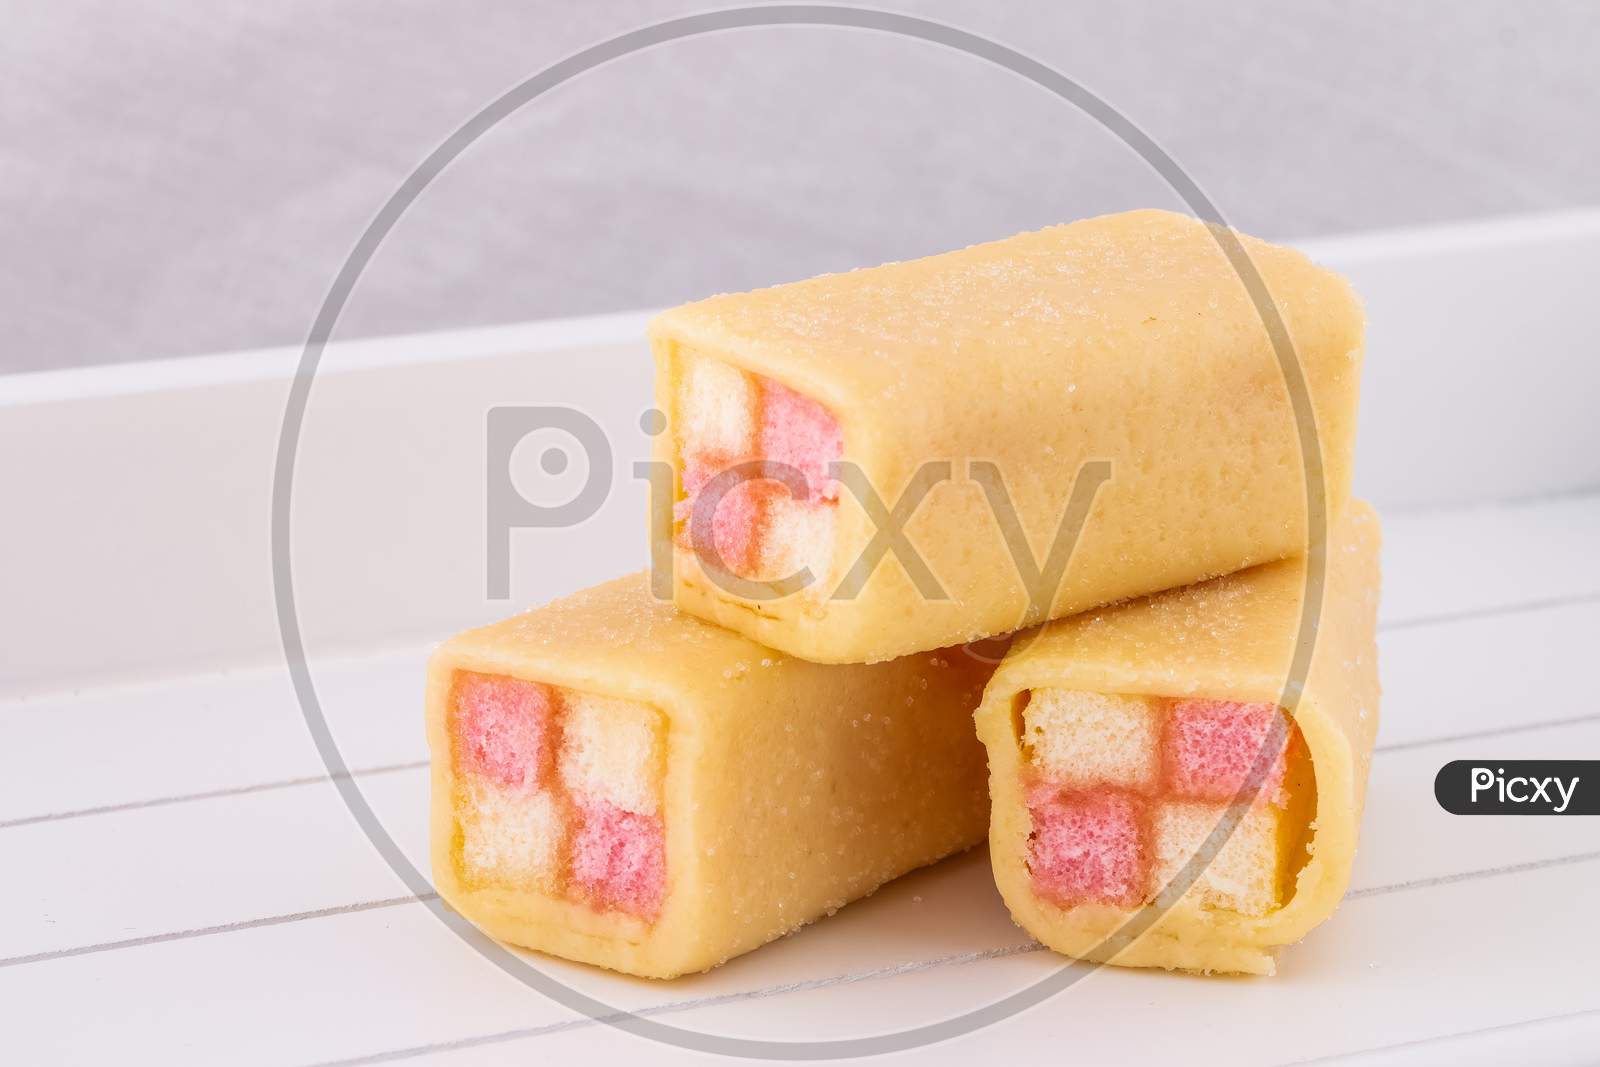 Delicious Mini Battenberg Cake, The Tradional Sweet Afternoon Tea Snack. Pink And Yellow Sponge Cake Wrapped In Almond Marzipan.